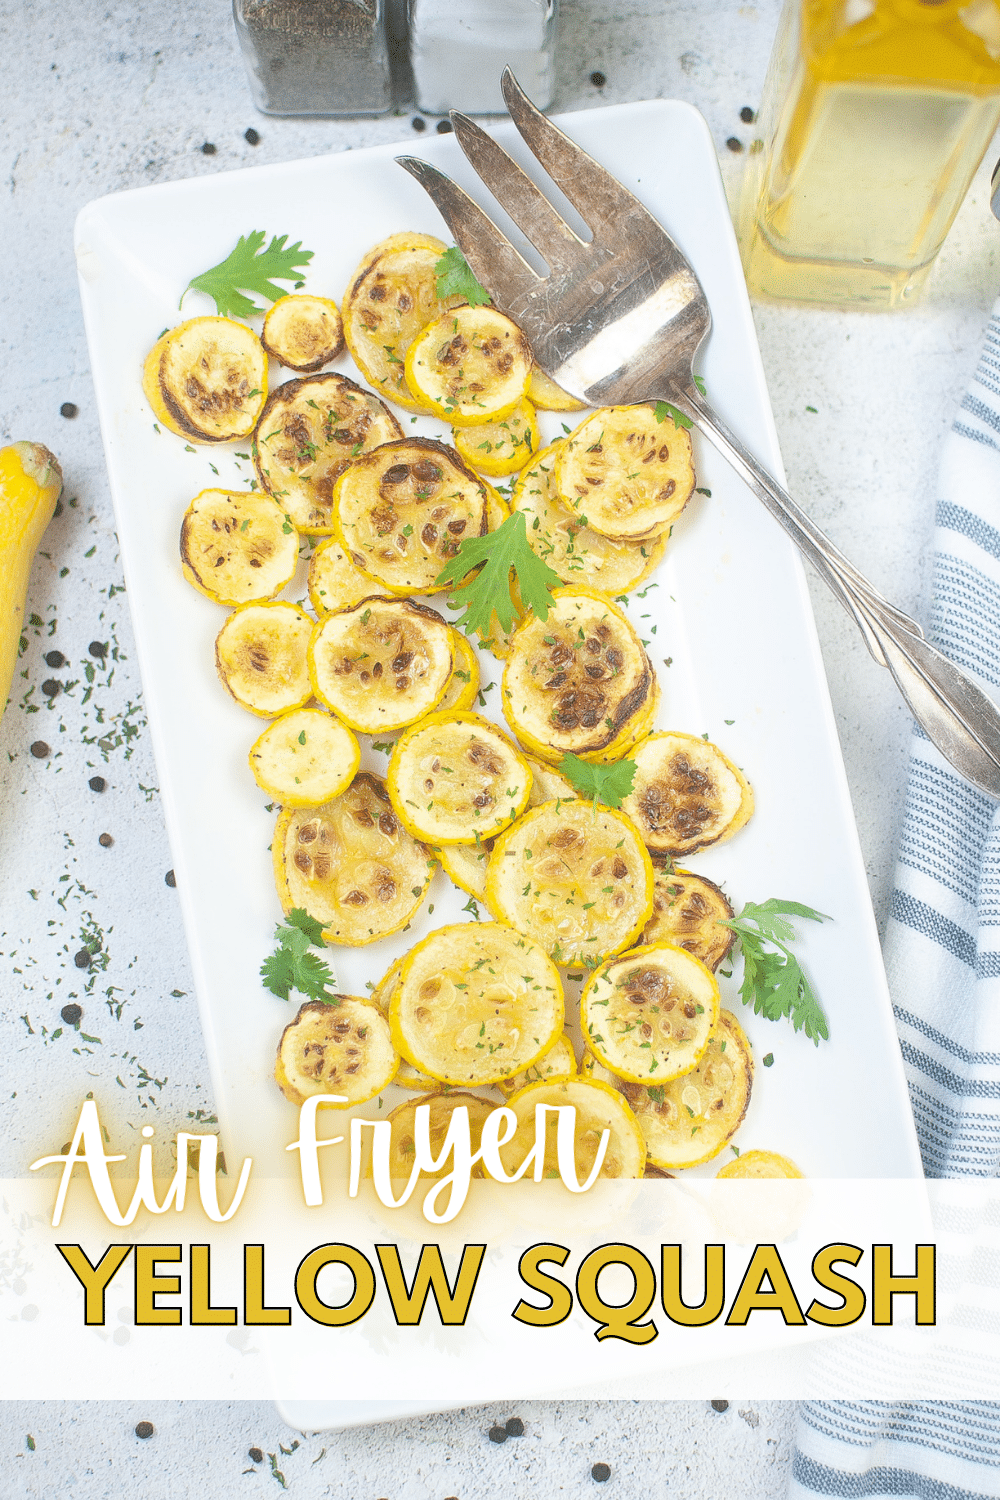 This Air Fryer Yellow Squash is a healthy, delicious and easy to make side dish. It's also family-friendly and picky eater approved. #airfryeryellowsquash #airfryer #yellowsquash #sidedish #healthyeating via @wondermomwannab